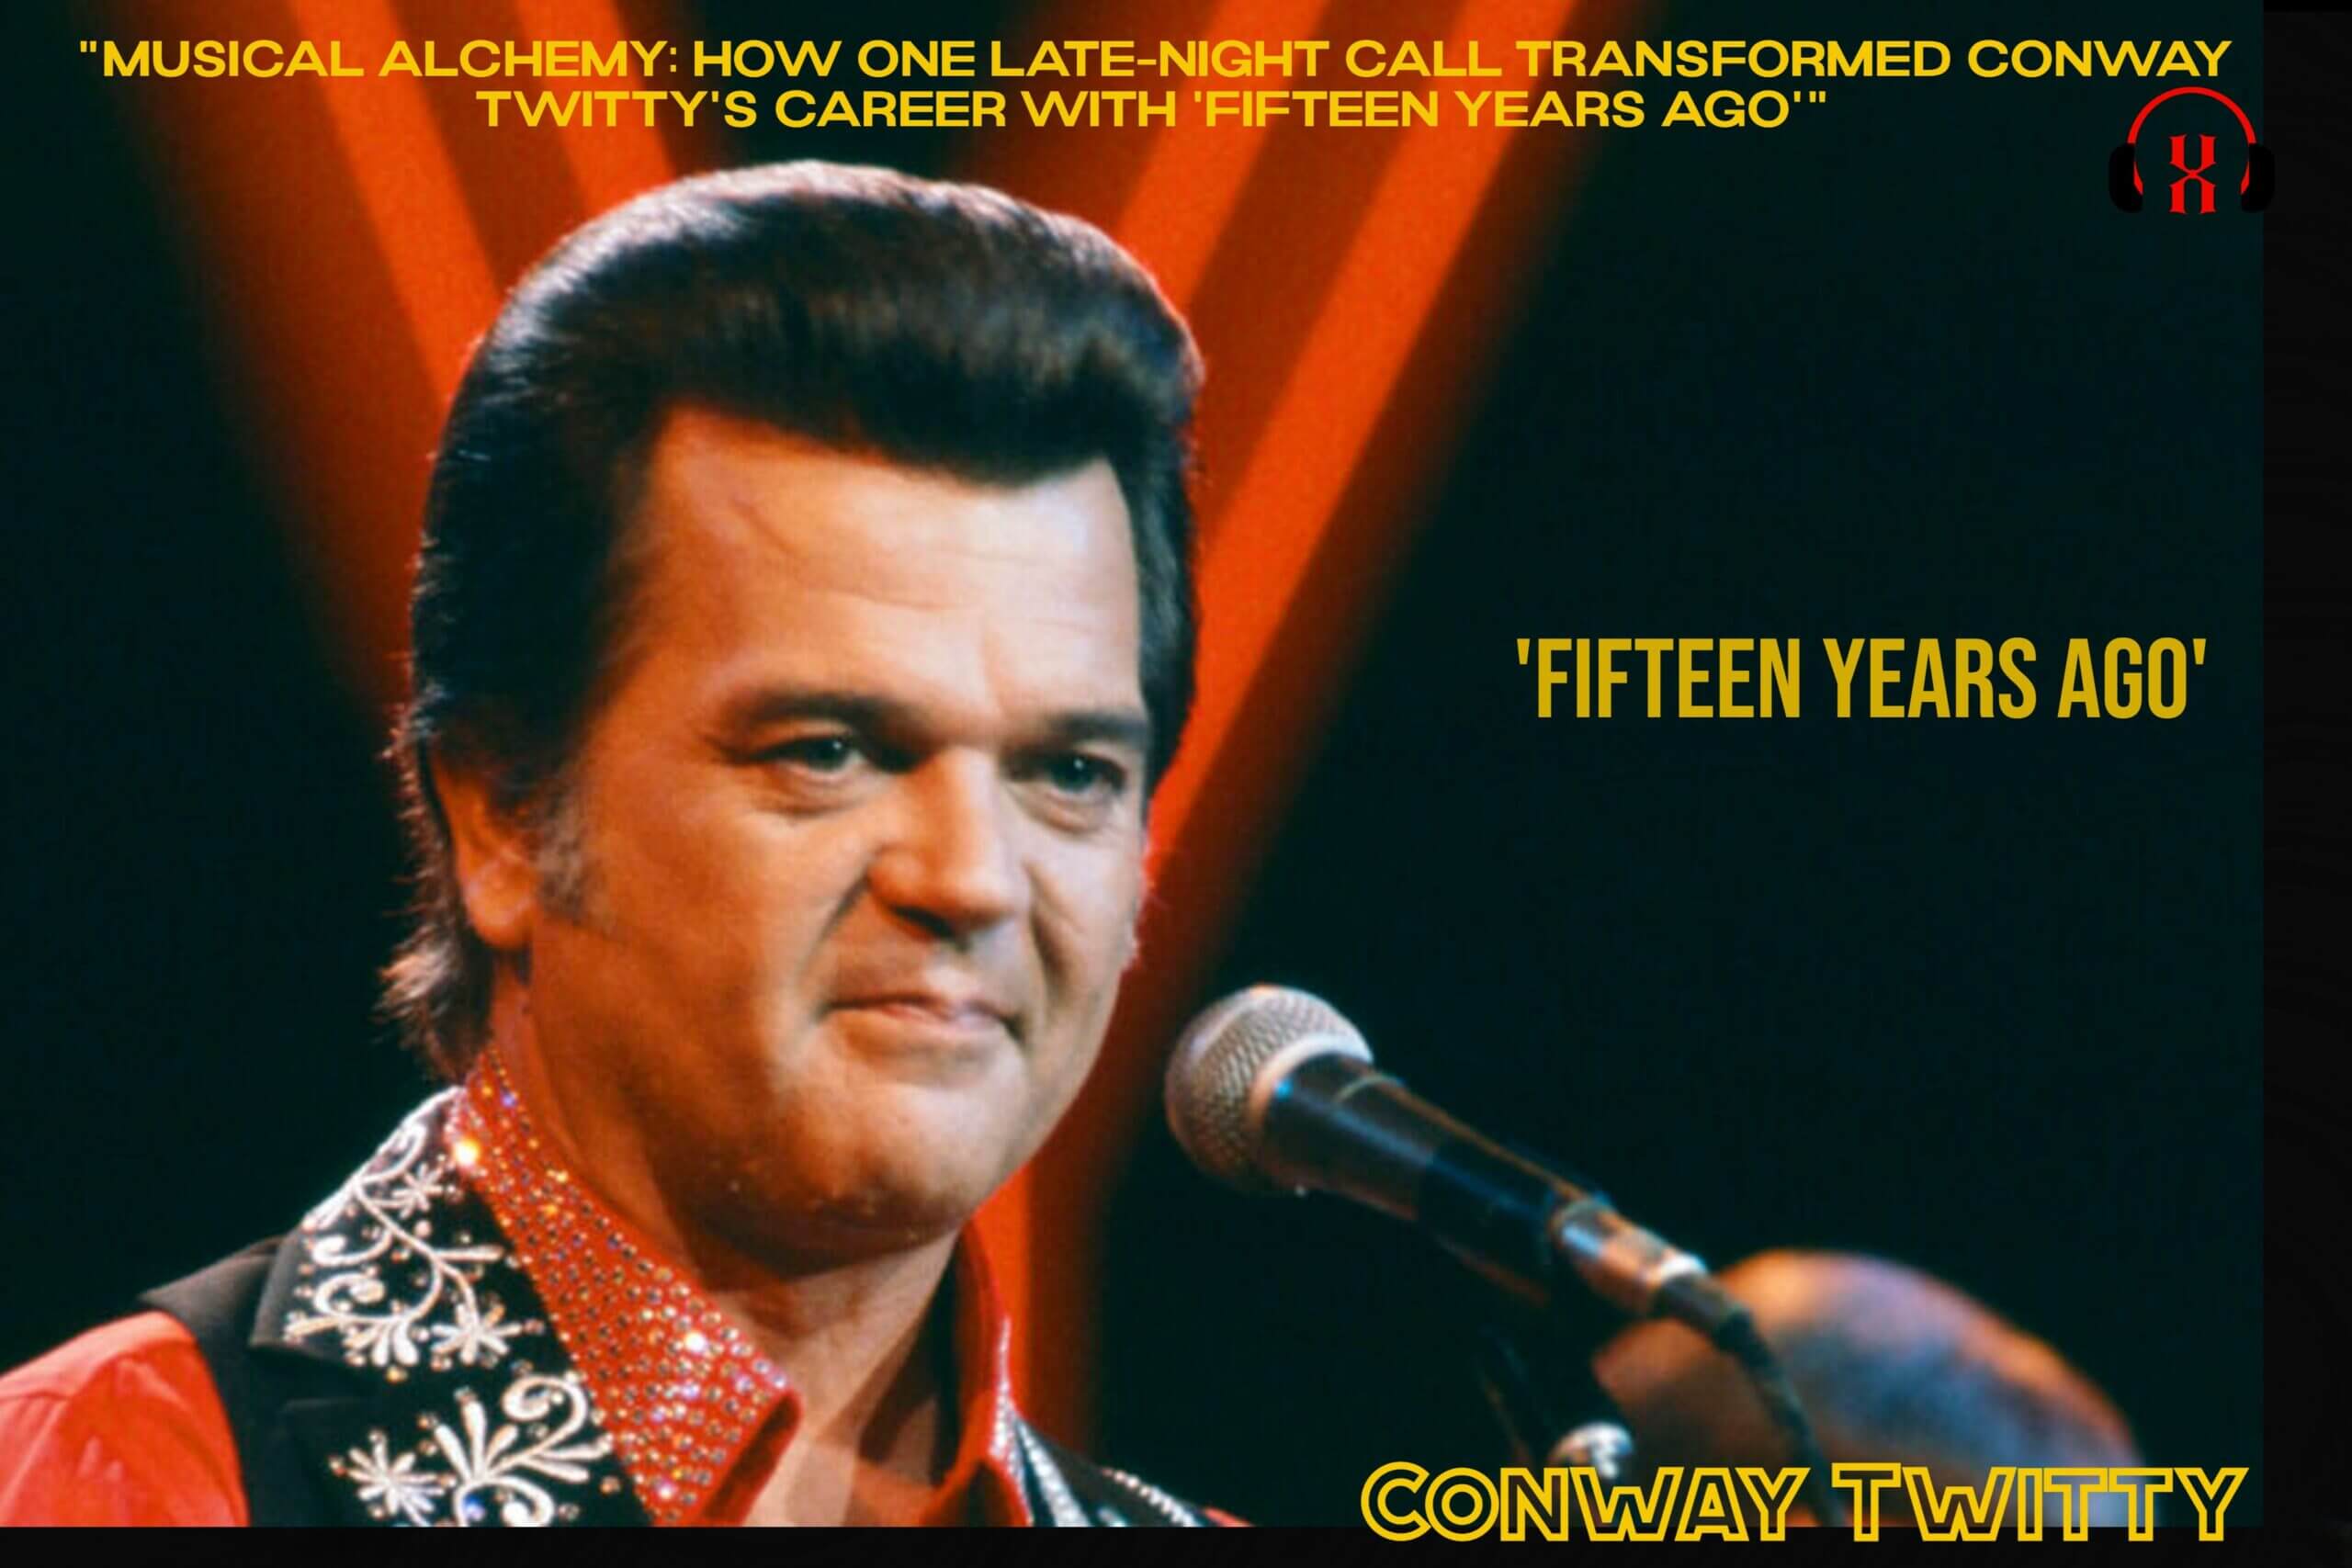 “Musical Alchemy: How One Late-Night Call Transformed Conway Twitty’s Career with ‘Fifteen Years Ago'”